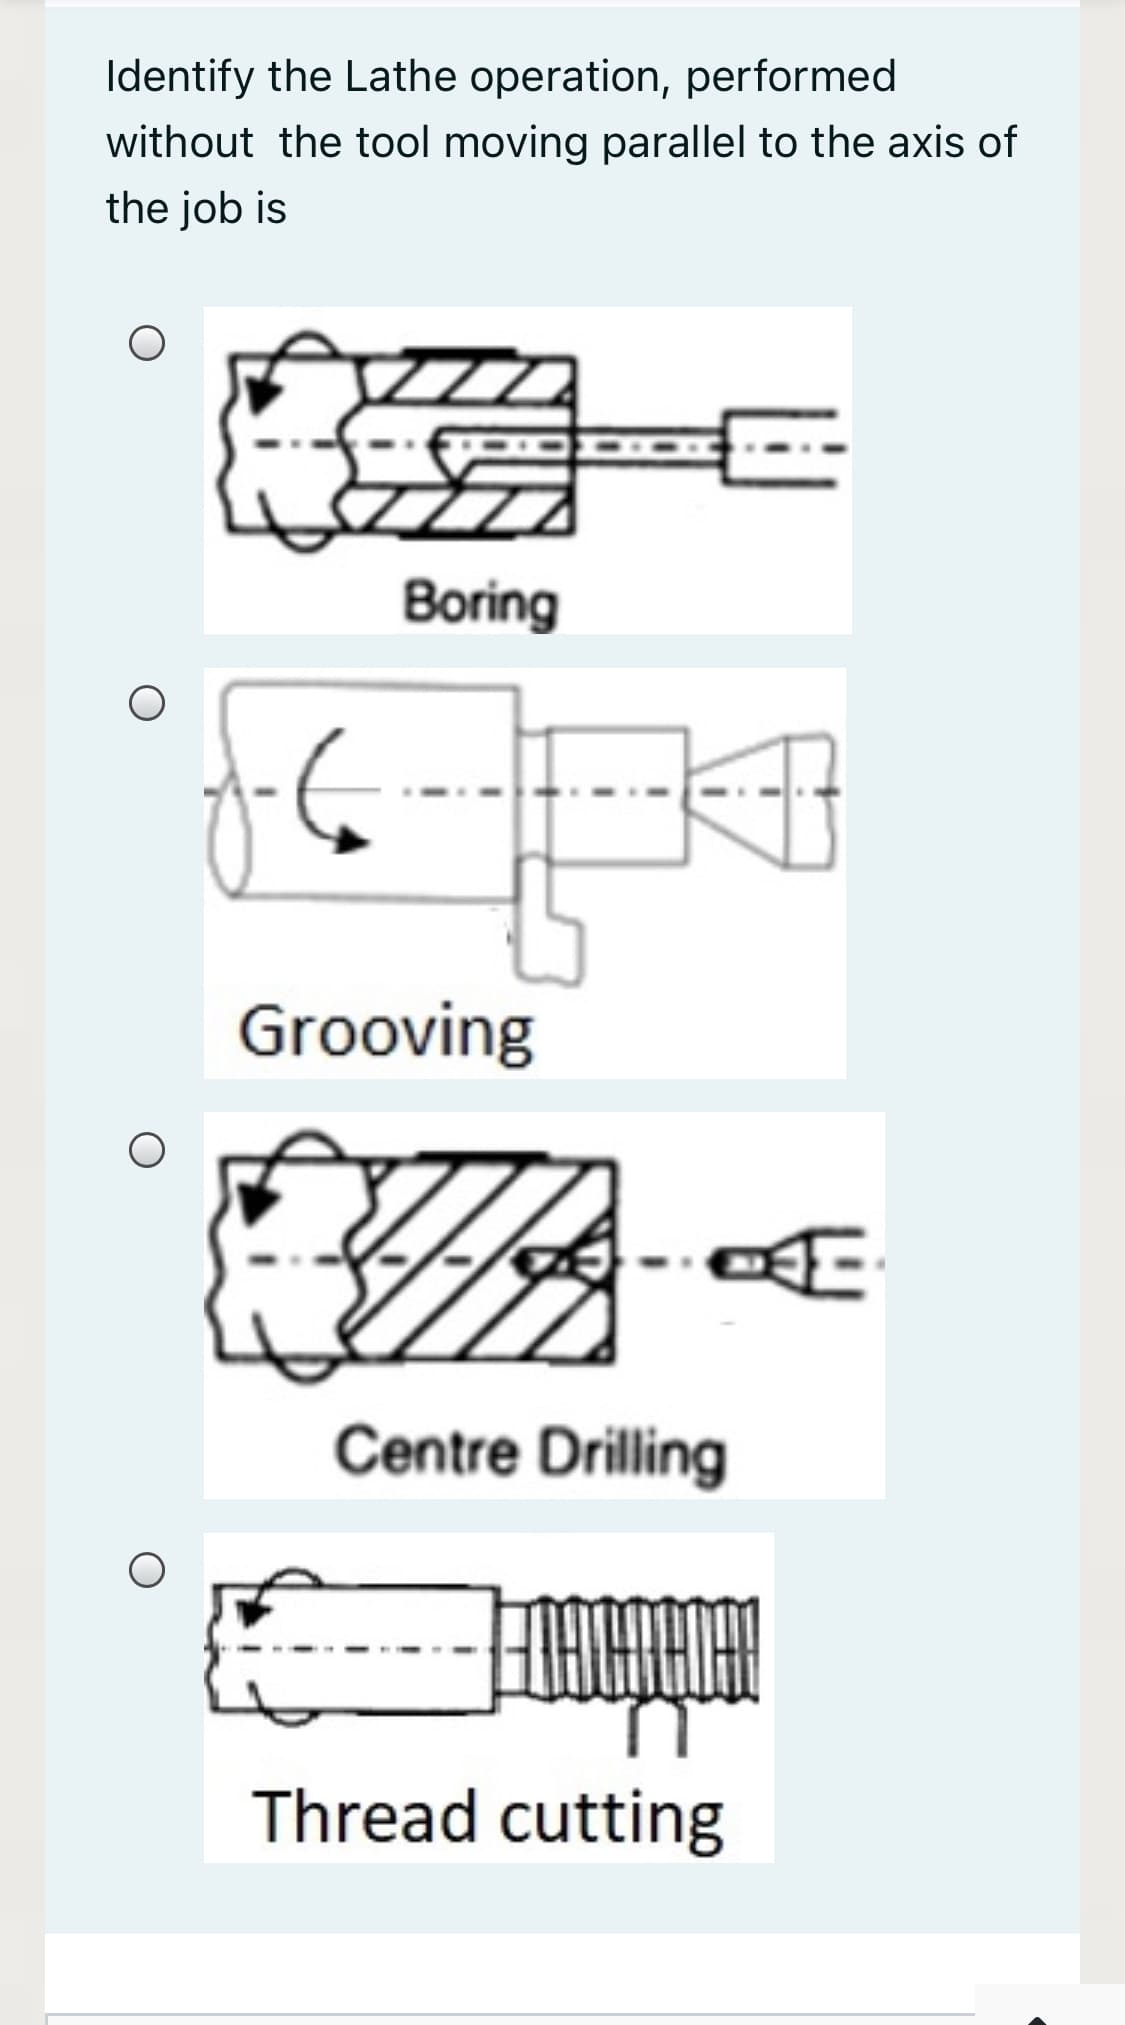 Identify the Lathe operation, performed
without the tool moving parallel to the axis of
the job is
Boring
Grooving
Centre Drilling
Thread cutting
